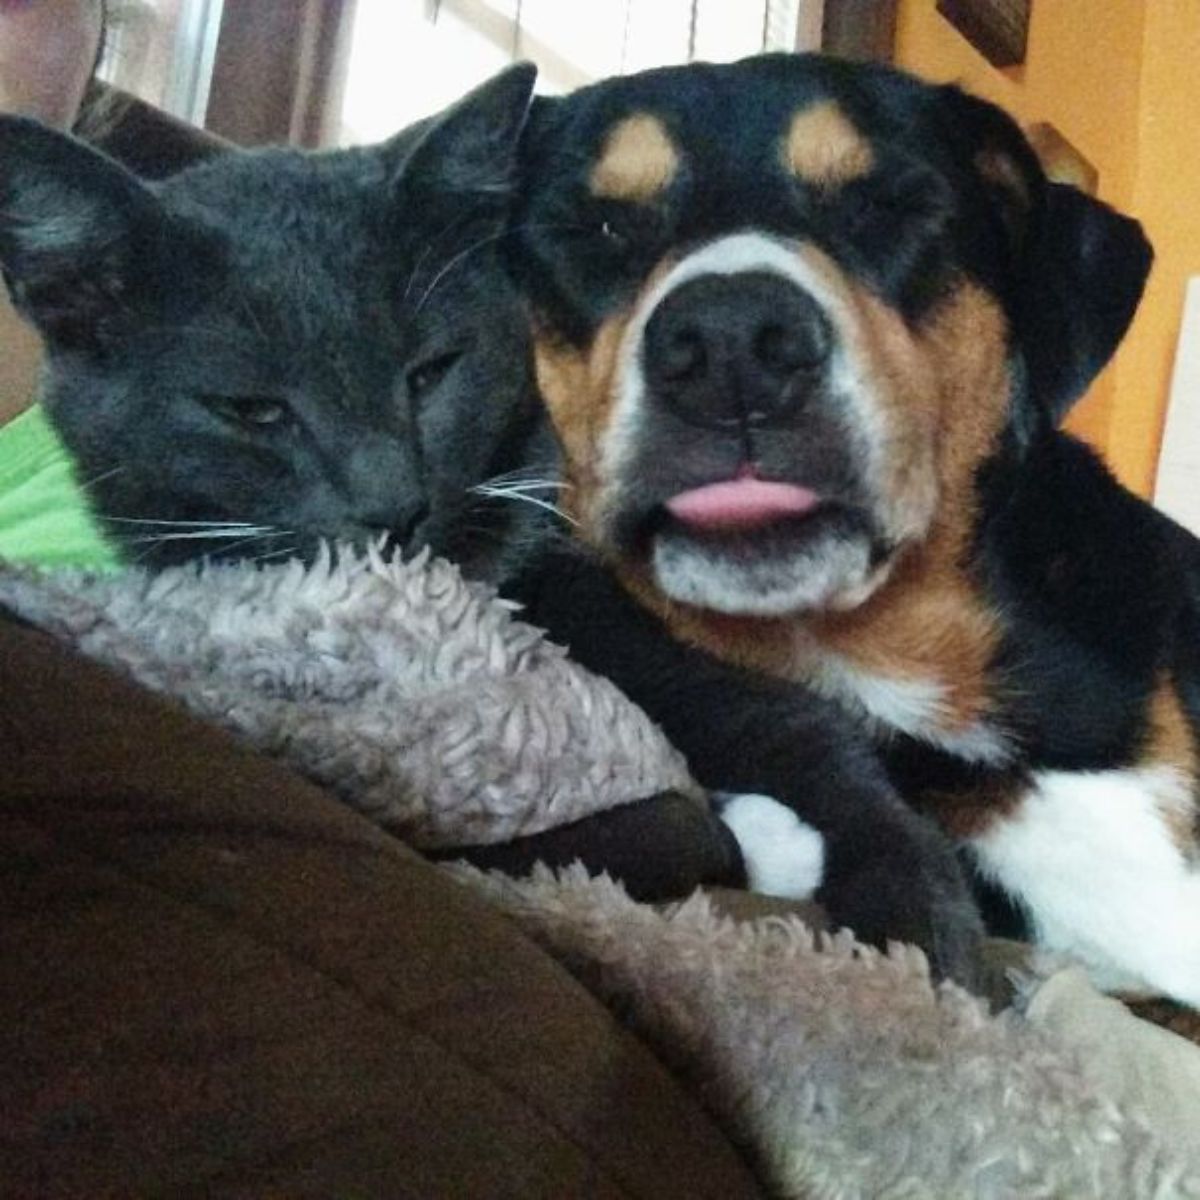 black brown and white dog with the tongue sticking out slightly cuddling with a grey cat